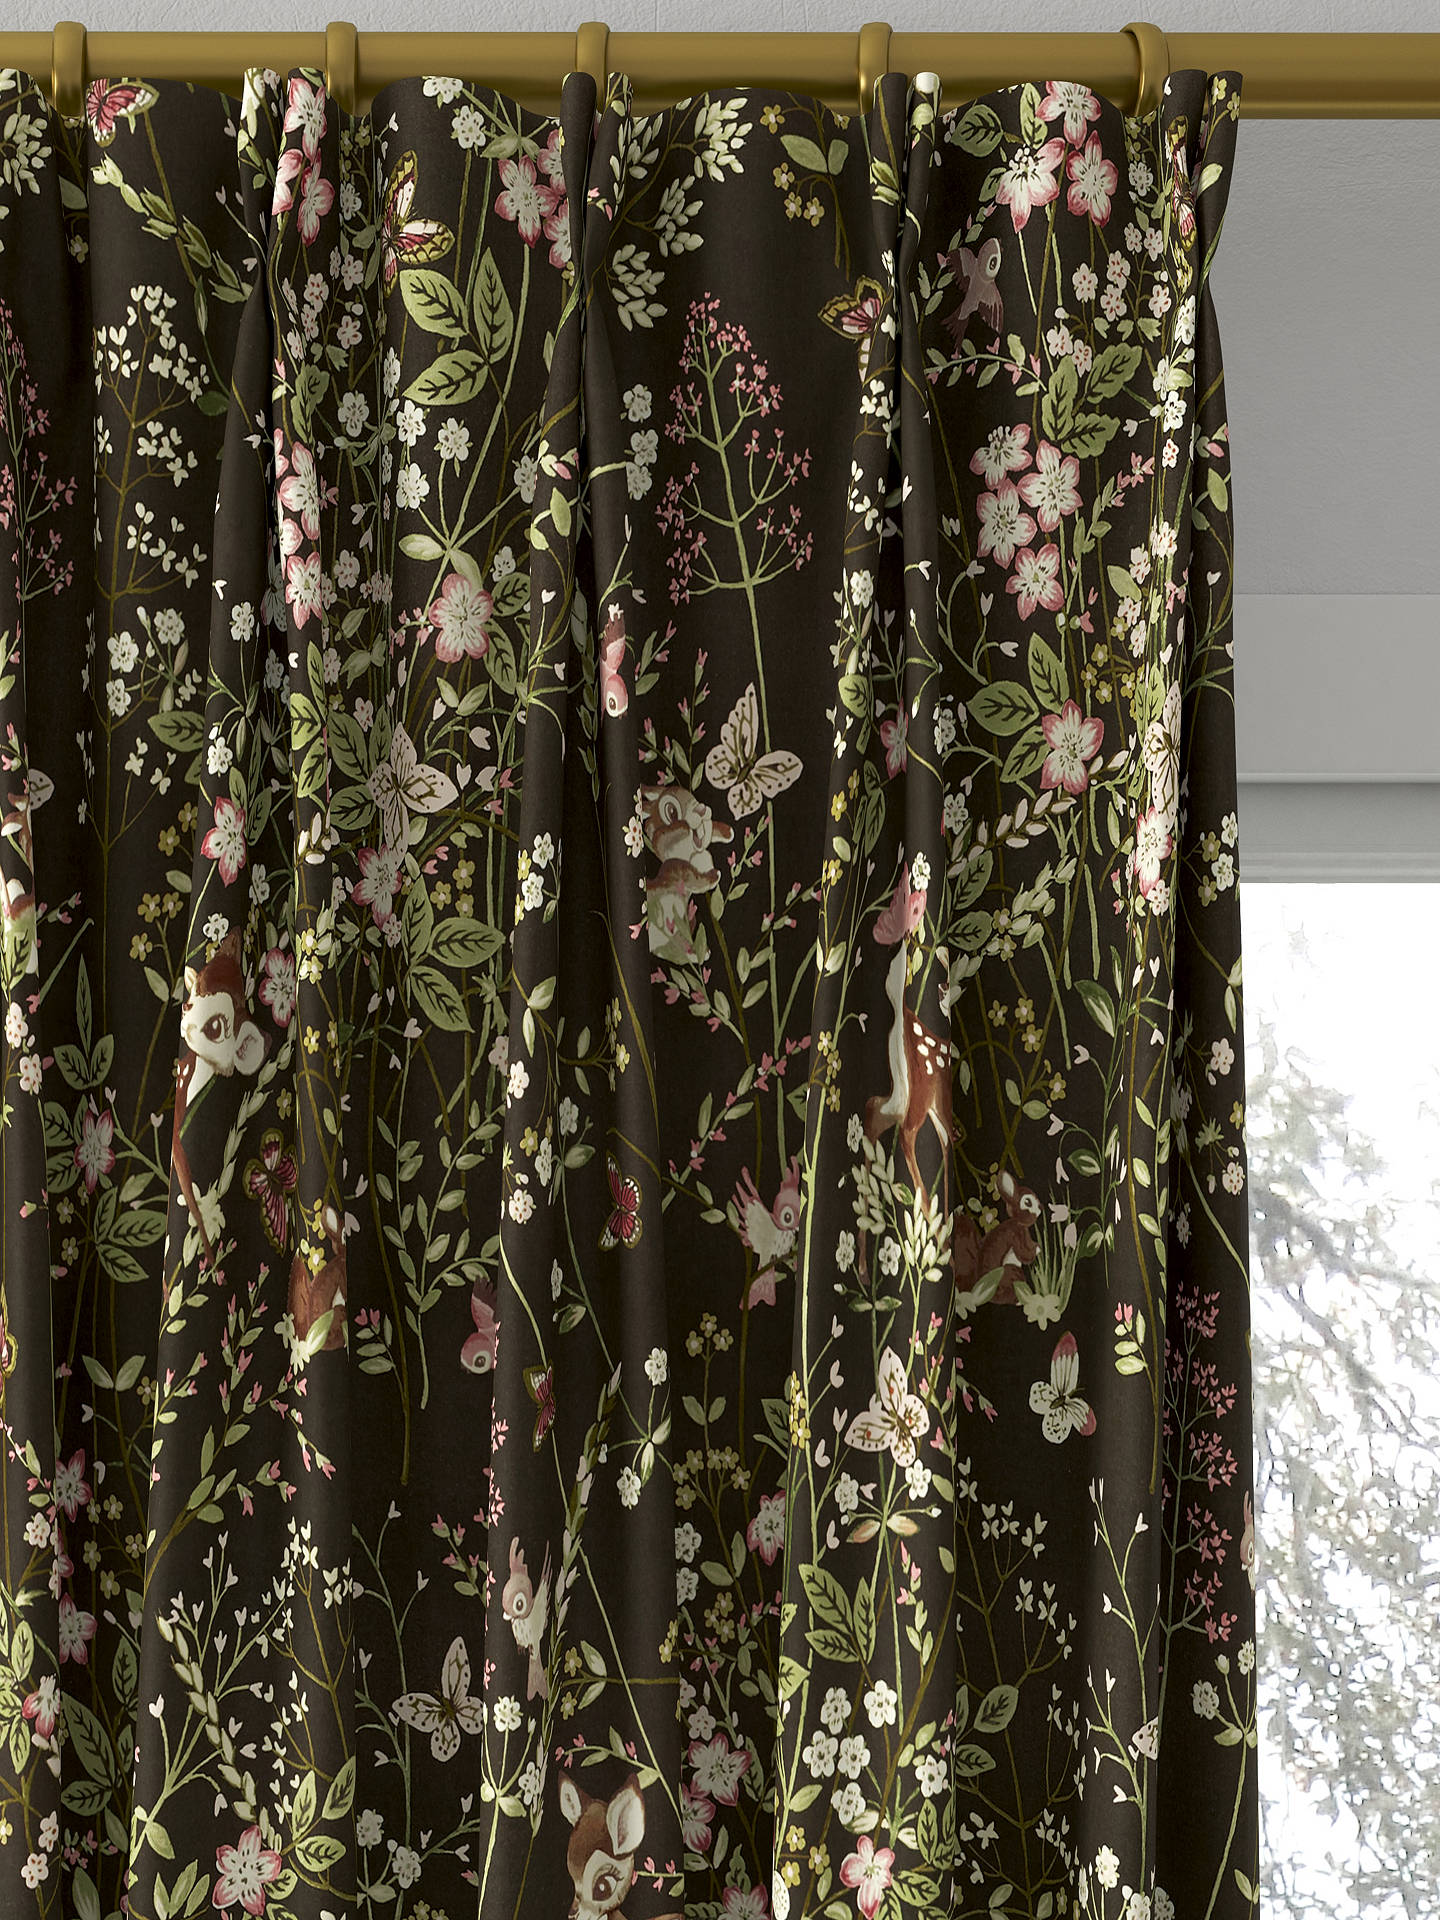 Sanderson Bambi Made to Measure Curtains, Chocolate